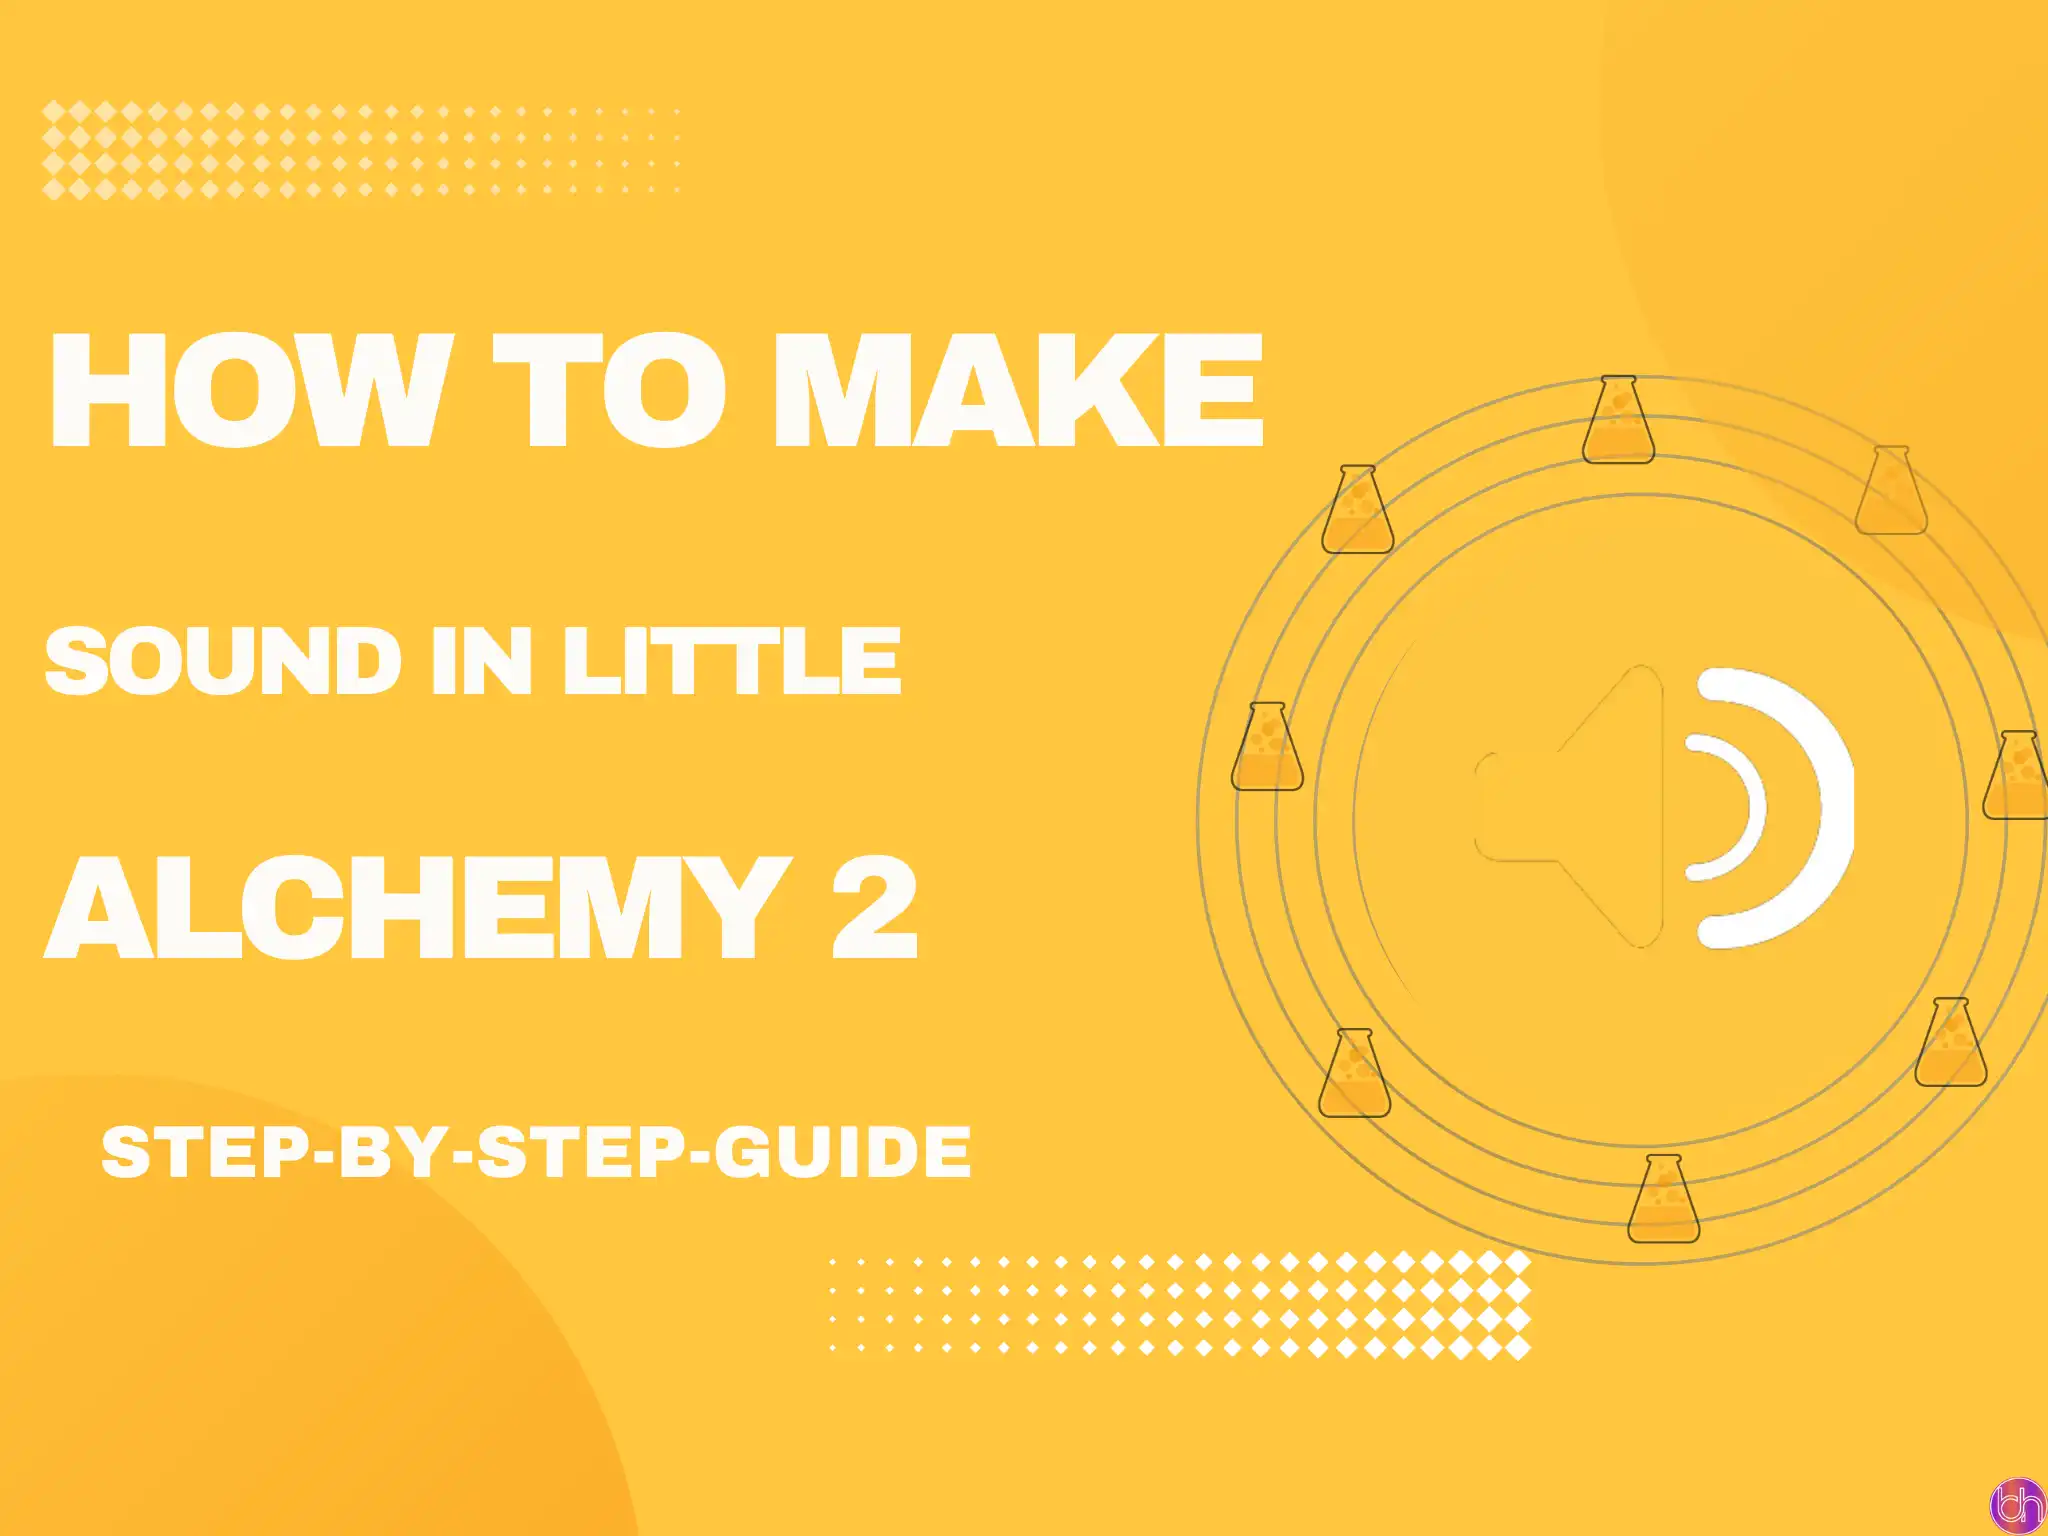 How to make Sound in Little Alchemy 2